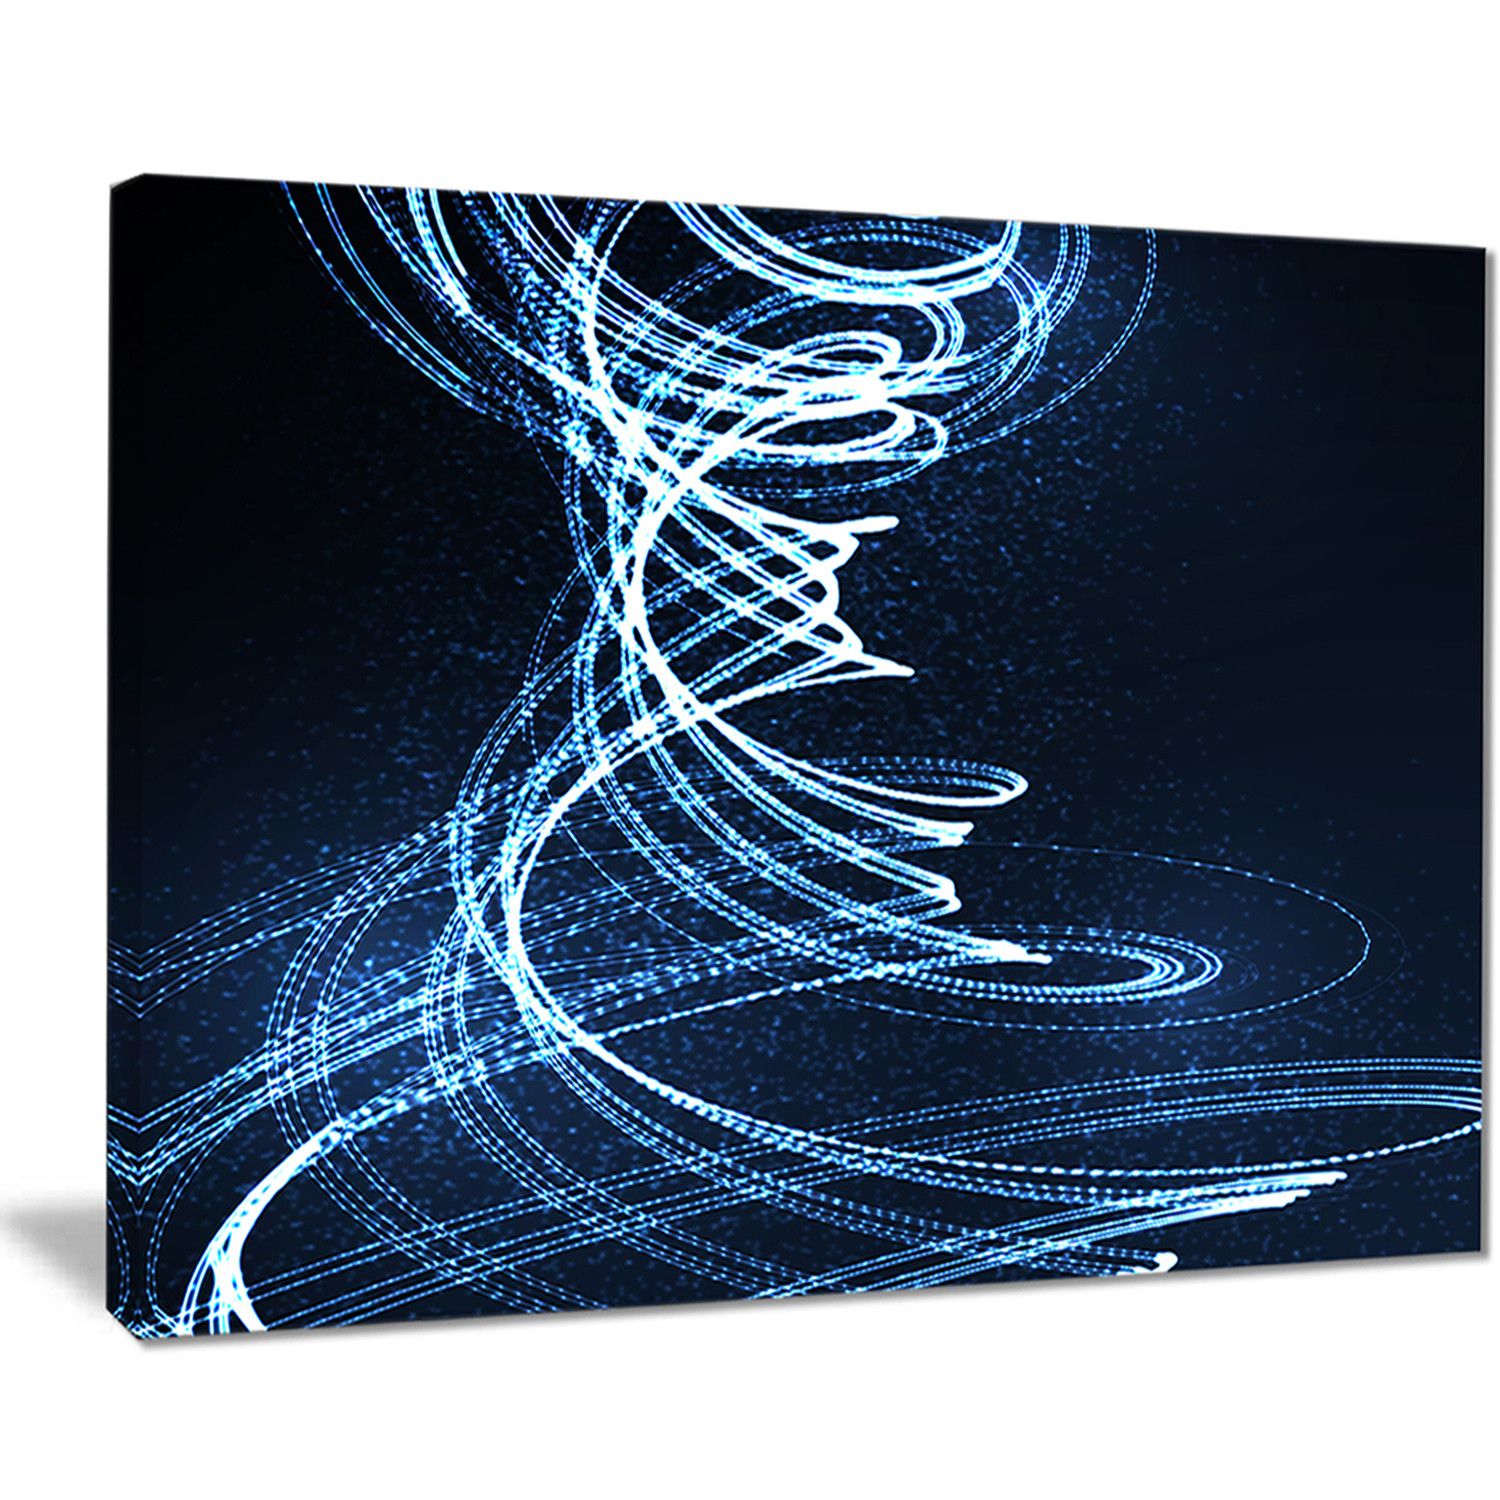 Singularity 7591 - painting on canvas - abstract art - 3D textured